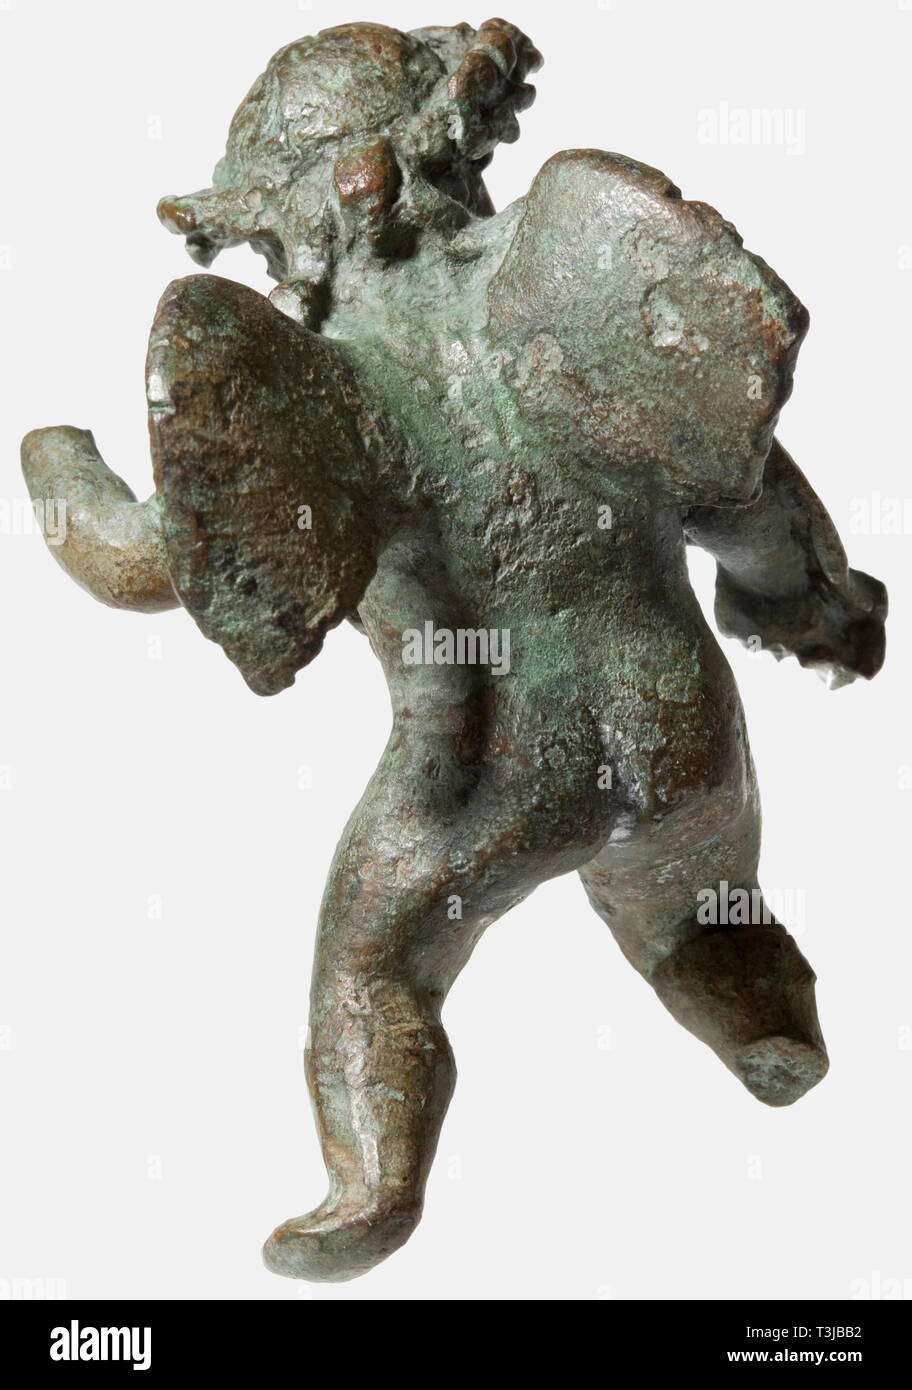 A Roman putto seated in riding position, 1st - 2nd century A.D. Cast bronze complemented by cold-working. The boy was probably originally riding a dolphin, the left arm raised, wearing around his neck a fruit garland, the head crowned with a leaf wreath, the finely modelled head with pierced eyes turned slightly to the left. Fine, dark green patina, the right foot and left hand missing, the wings slightly damaged. Height 7.8 cm. A well-crafted small bronze figure of Roman origin. Provenance: German private collection, 1970s. historic, historical,, Additional-Rights-Clearance-Info-Not-Available Stock Photo